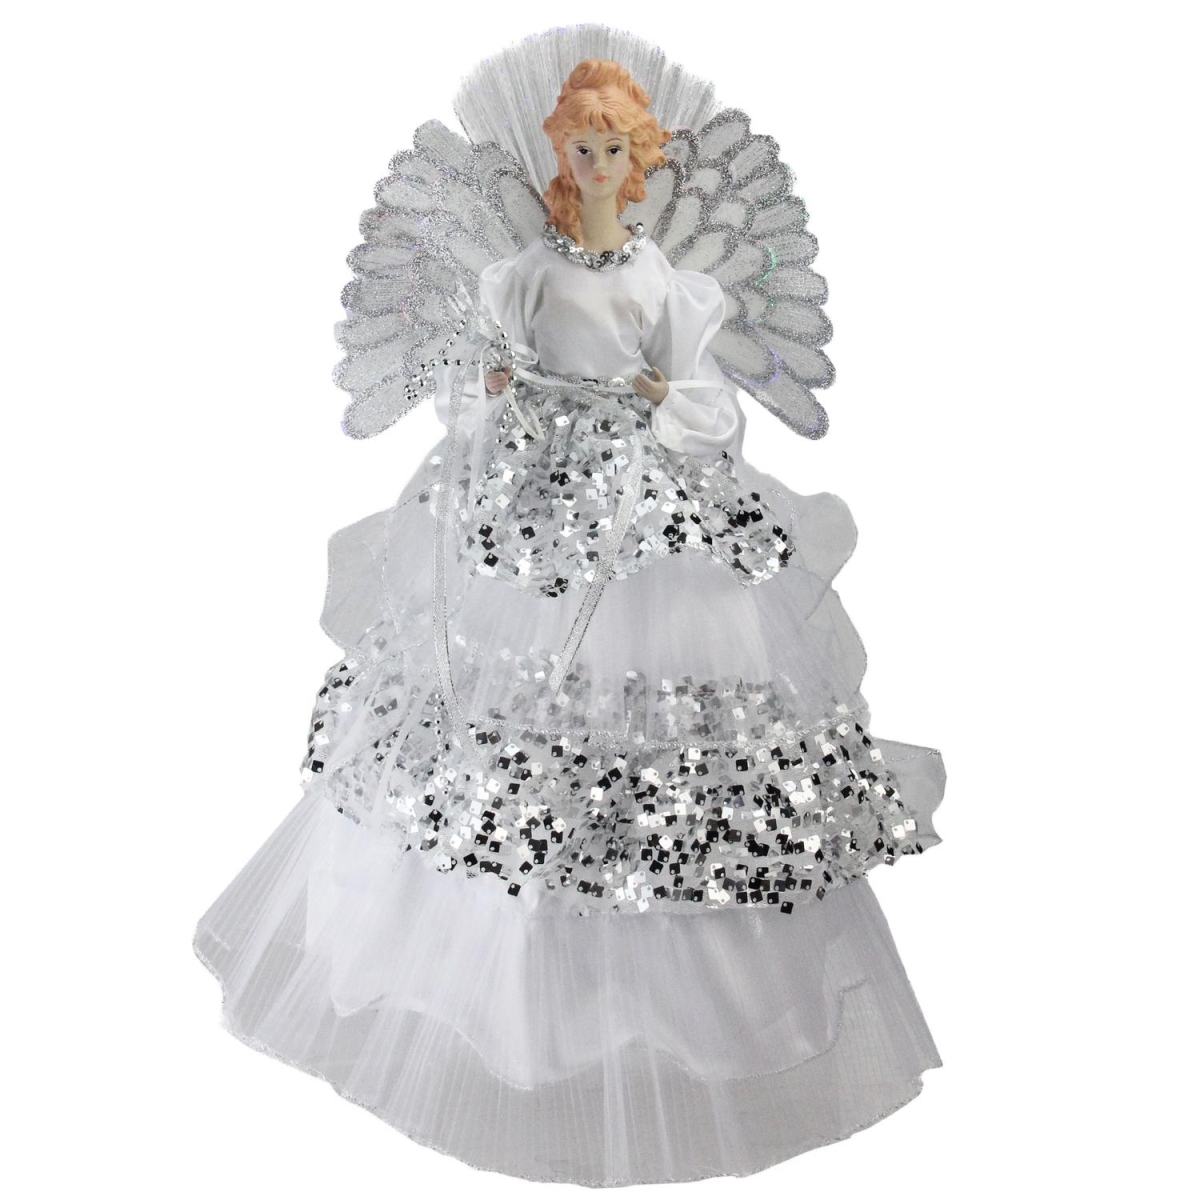 Picture of Northlight 32623514 16 in. Angel in Sequined Gown Christmas Tree Topper, Silver